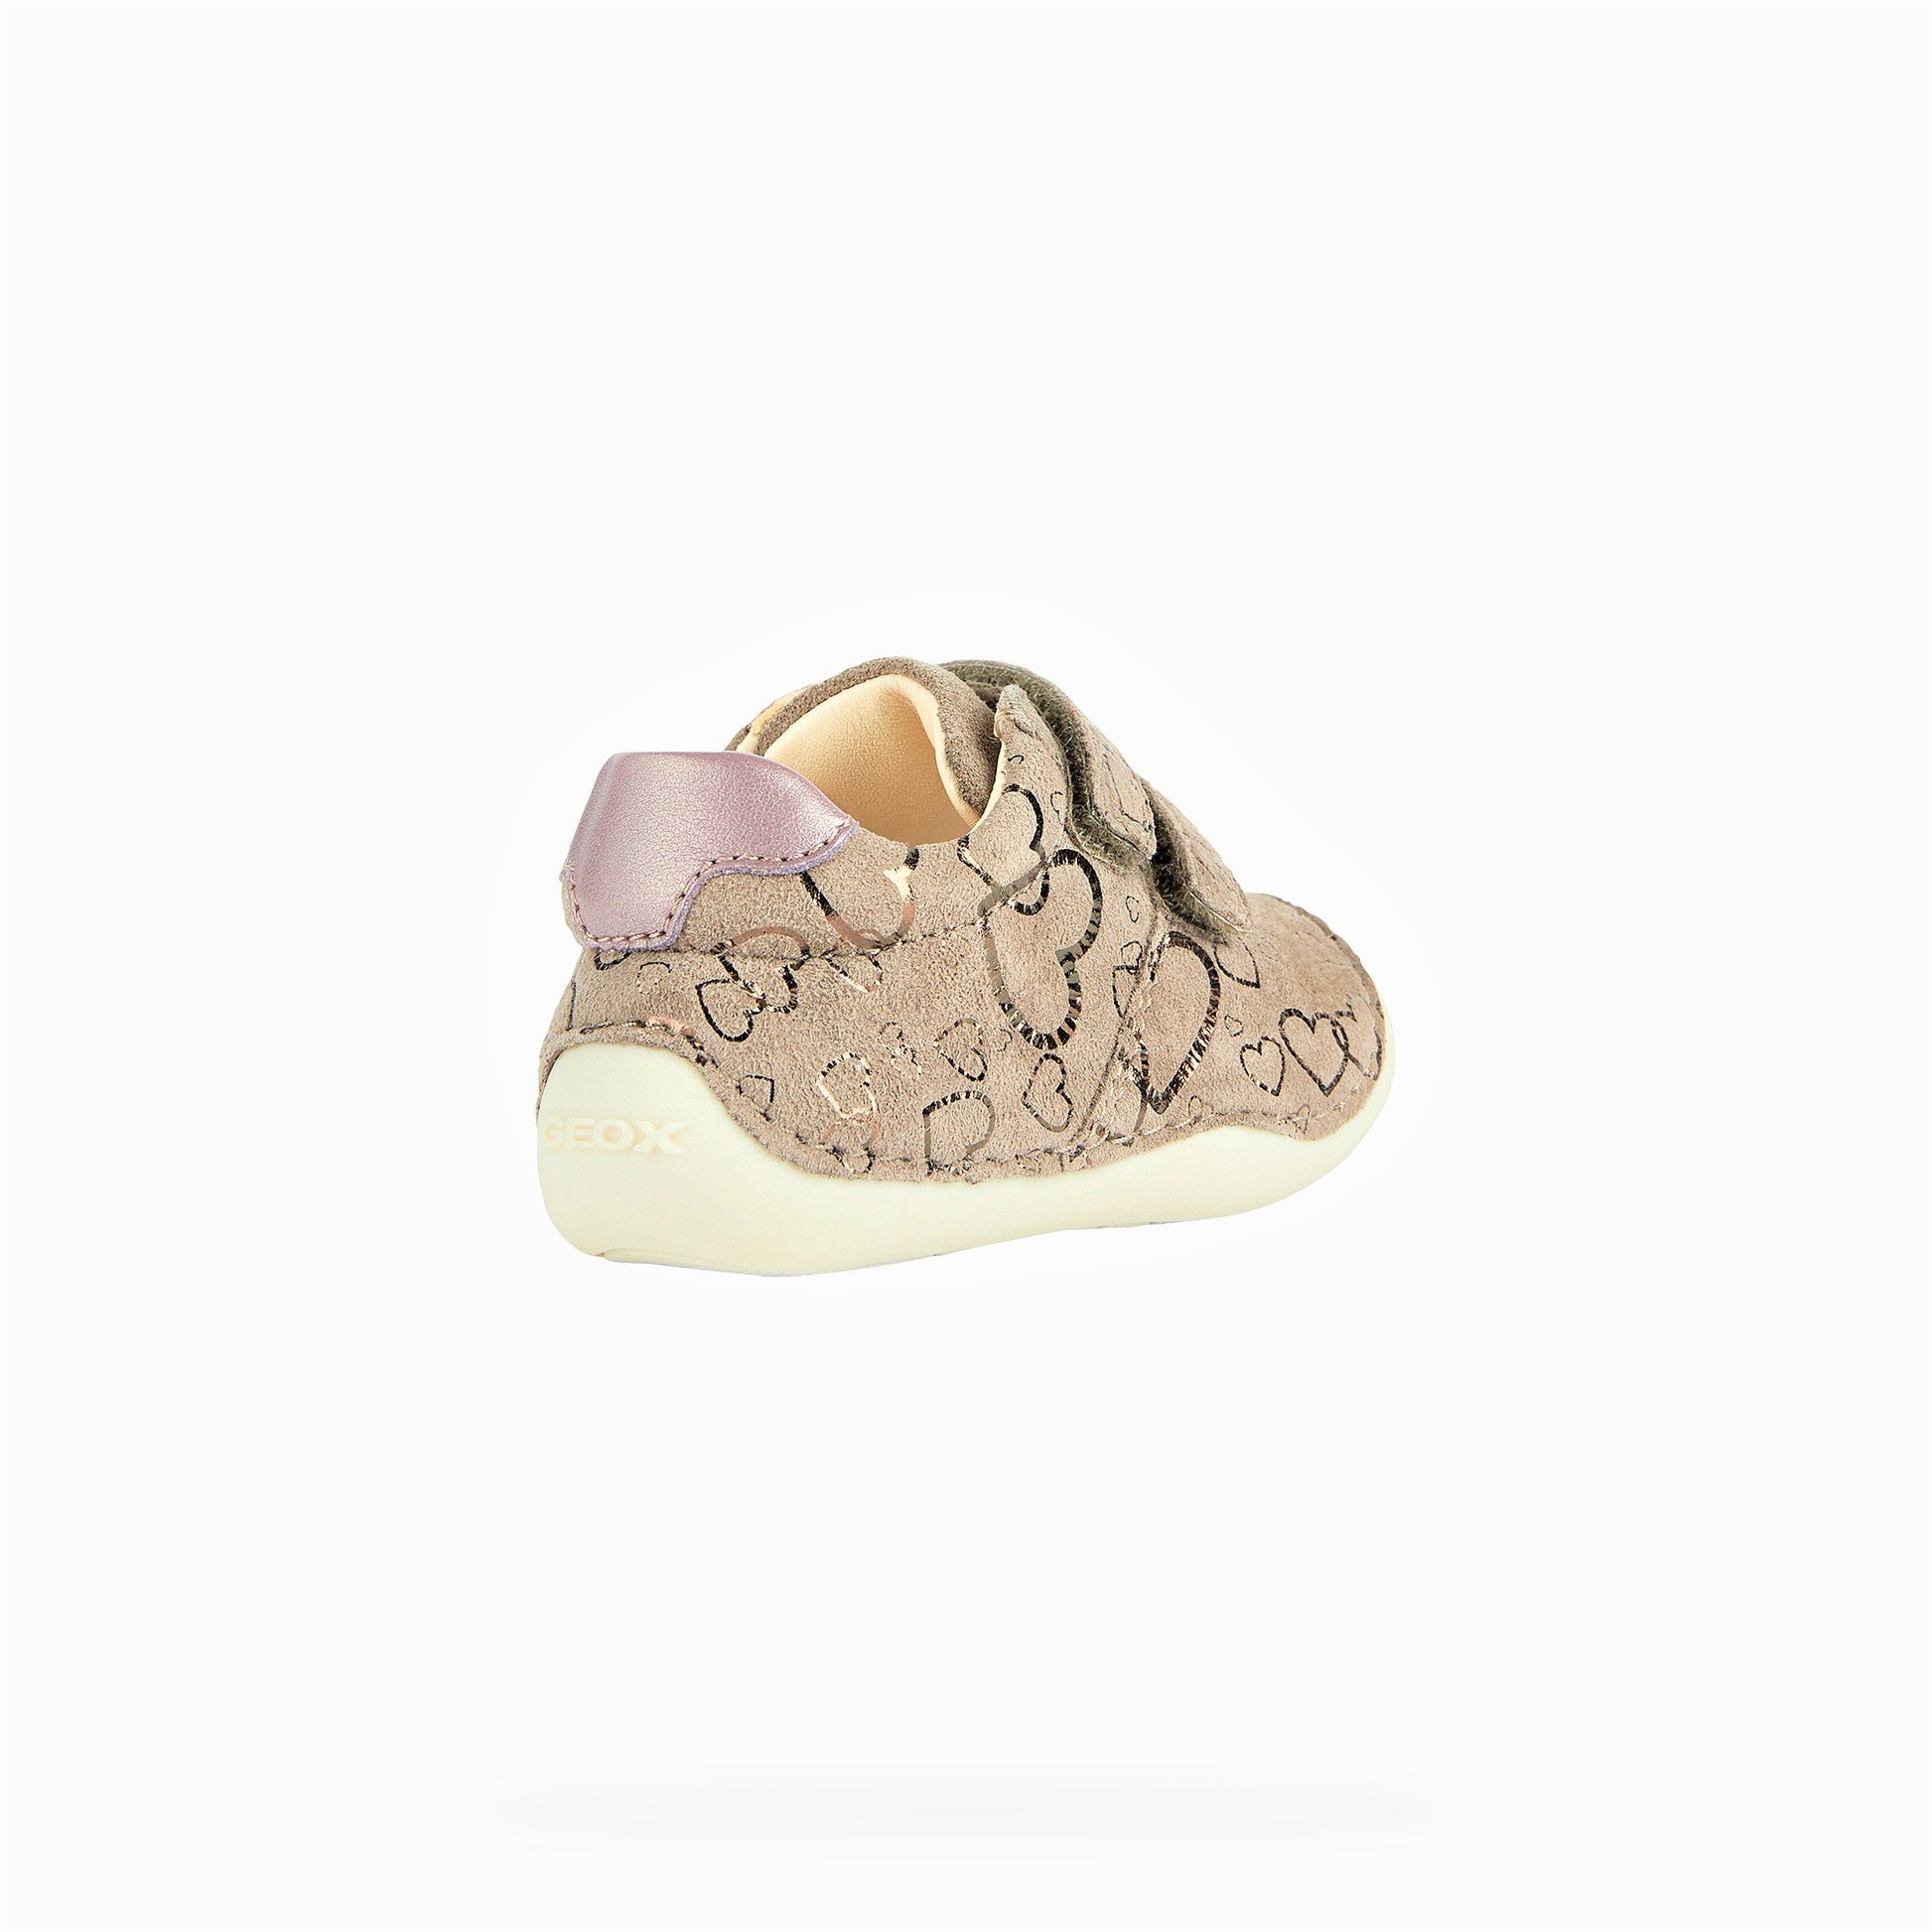 A girls Pre-walker by Geox, Style B Tutim Girl, VElcro fastening, in pink suede with metallic heart print. Back angled view.